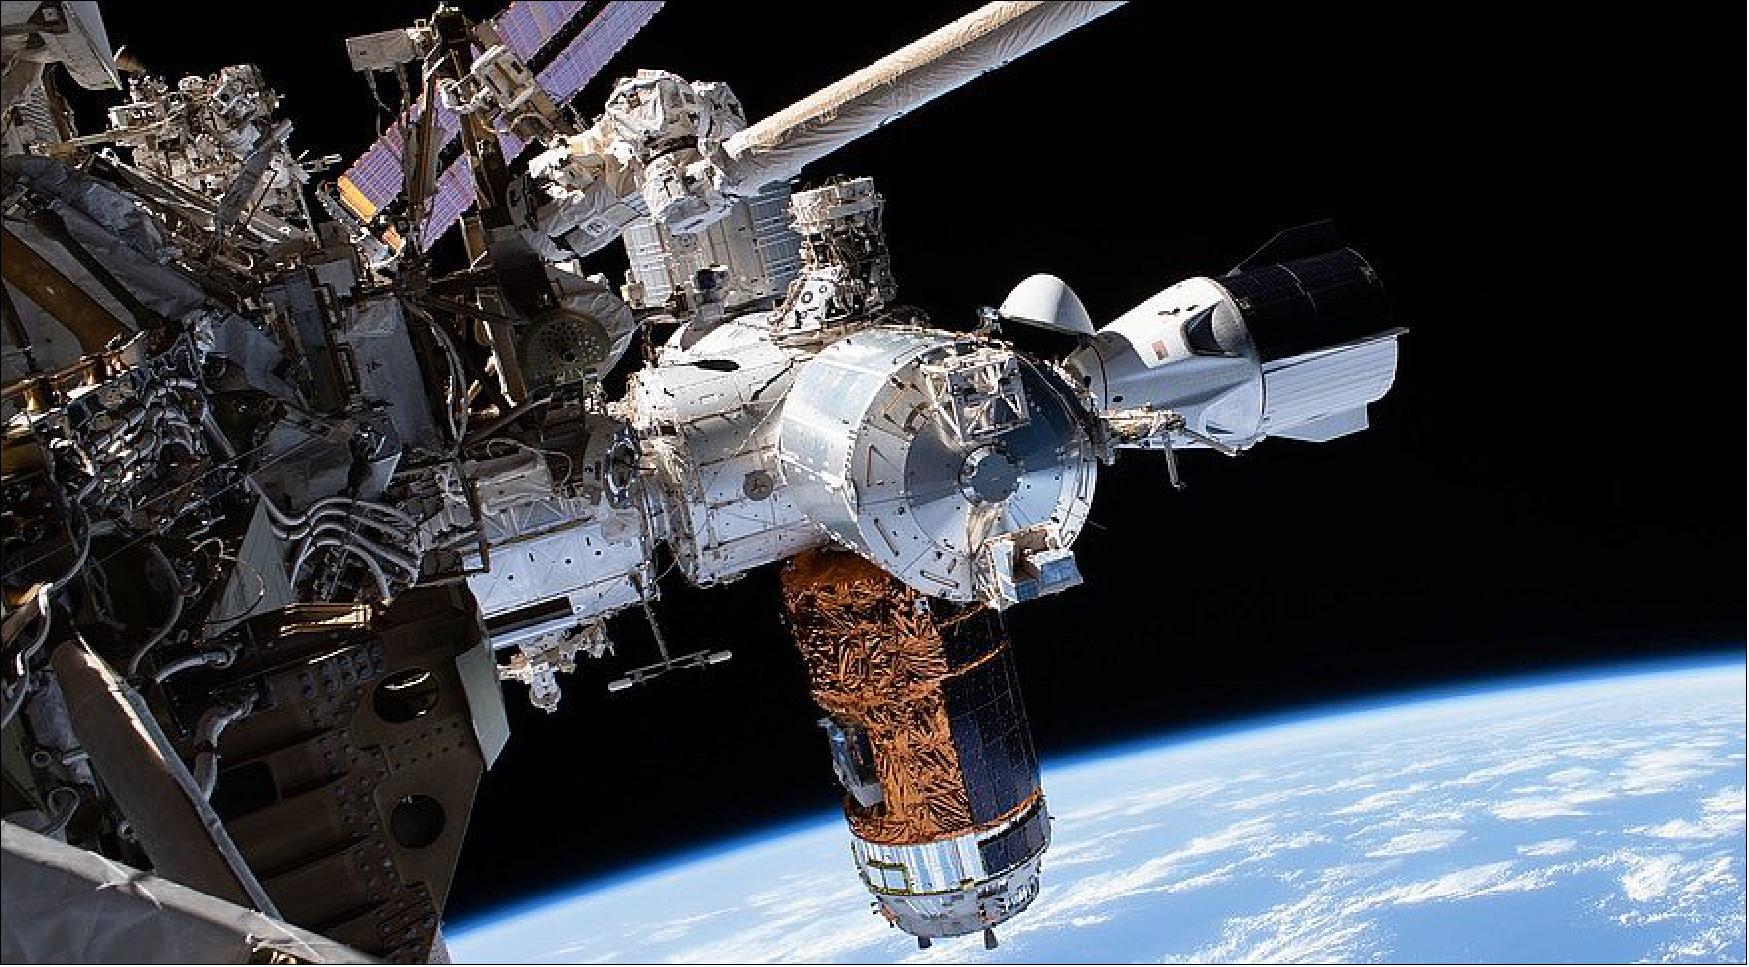 Figure 6: The SpaceX Crew Dragon spacecraft (right) docked to the space station as seen during a recent spacewalk. The spacecraft will undock from the station and return to Earth in early August. The structure in the bottom center of the image is the HTV-9 vehicle of JAXA (image credit: NASA)